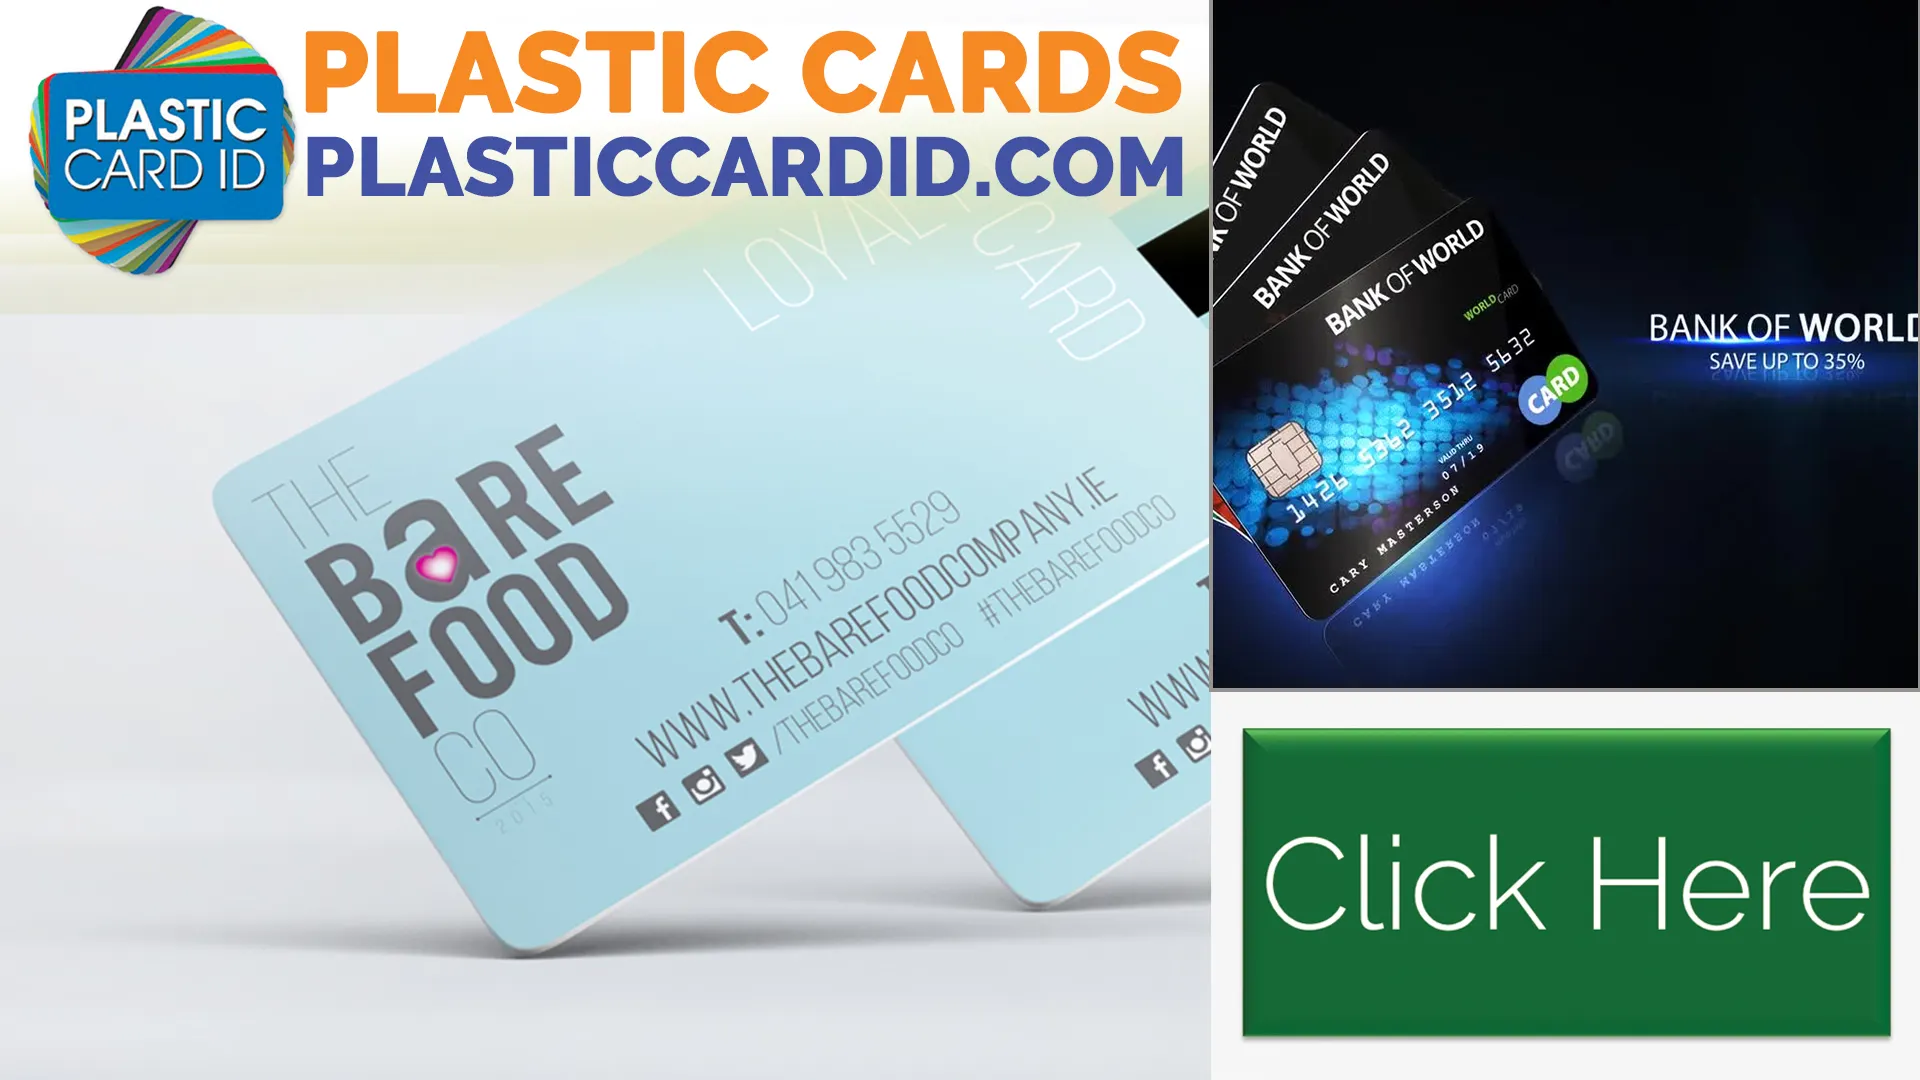 Unmatched Quality in Plastic Card Printing